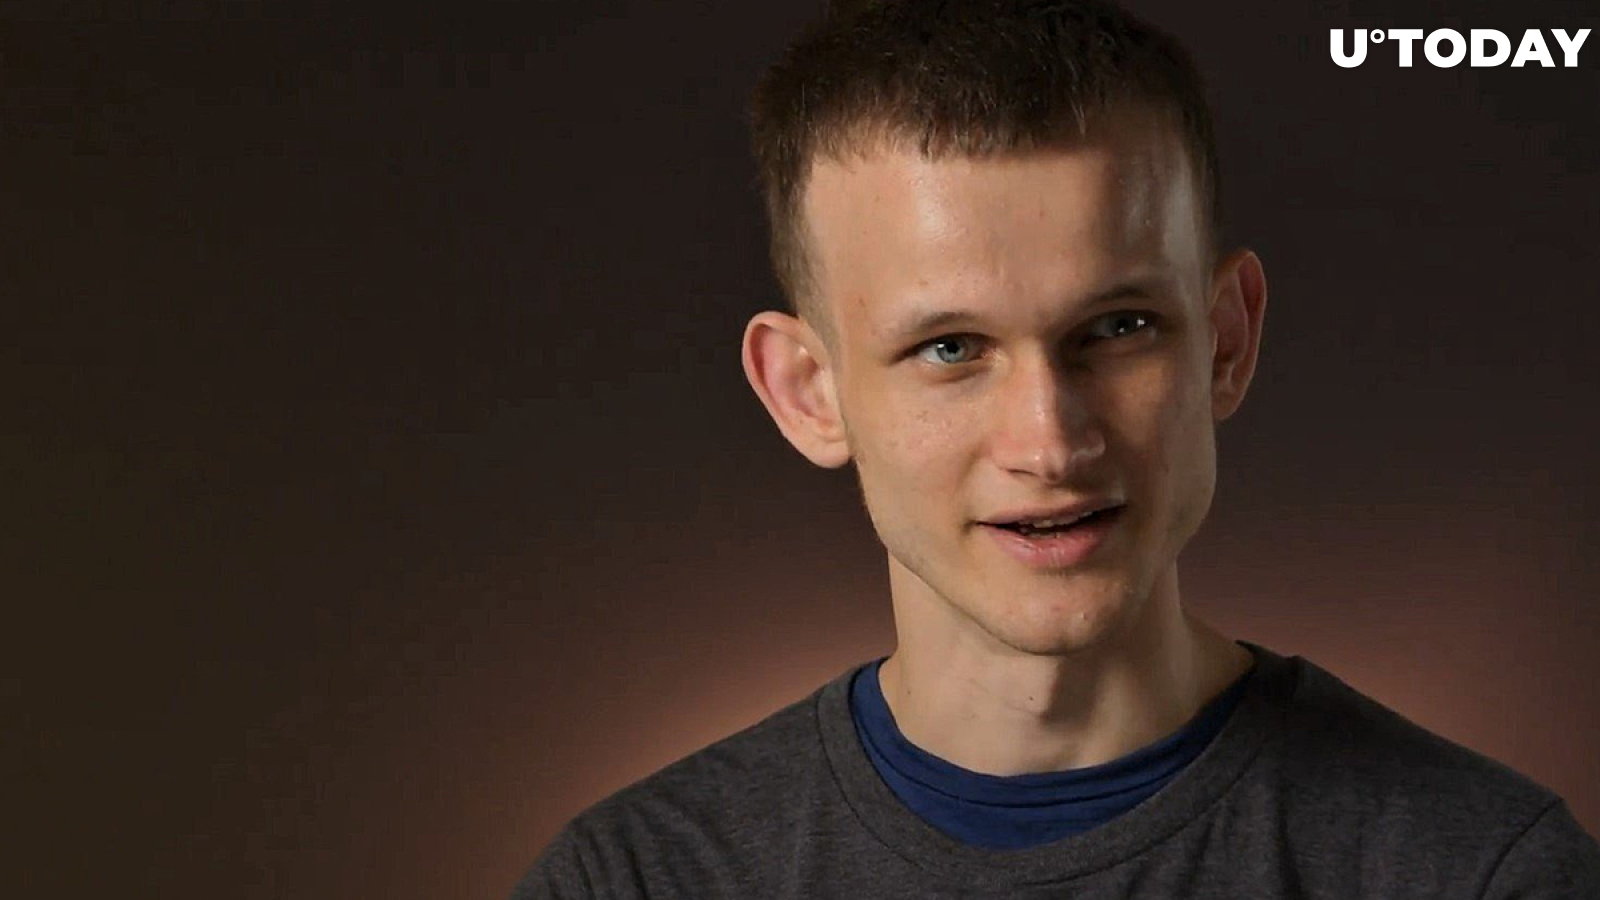 Bitcoin Maximalists Will Be on Wrong Side of History, According to Ethereum Co-Founder Vitalik Buterin